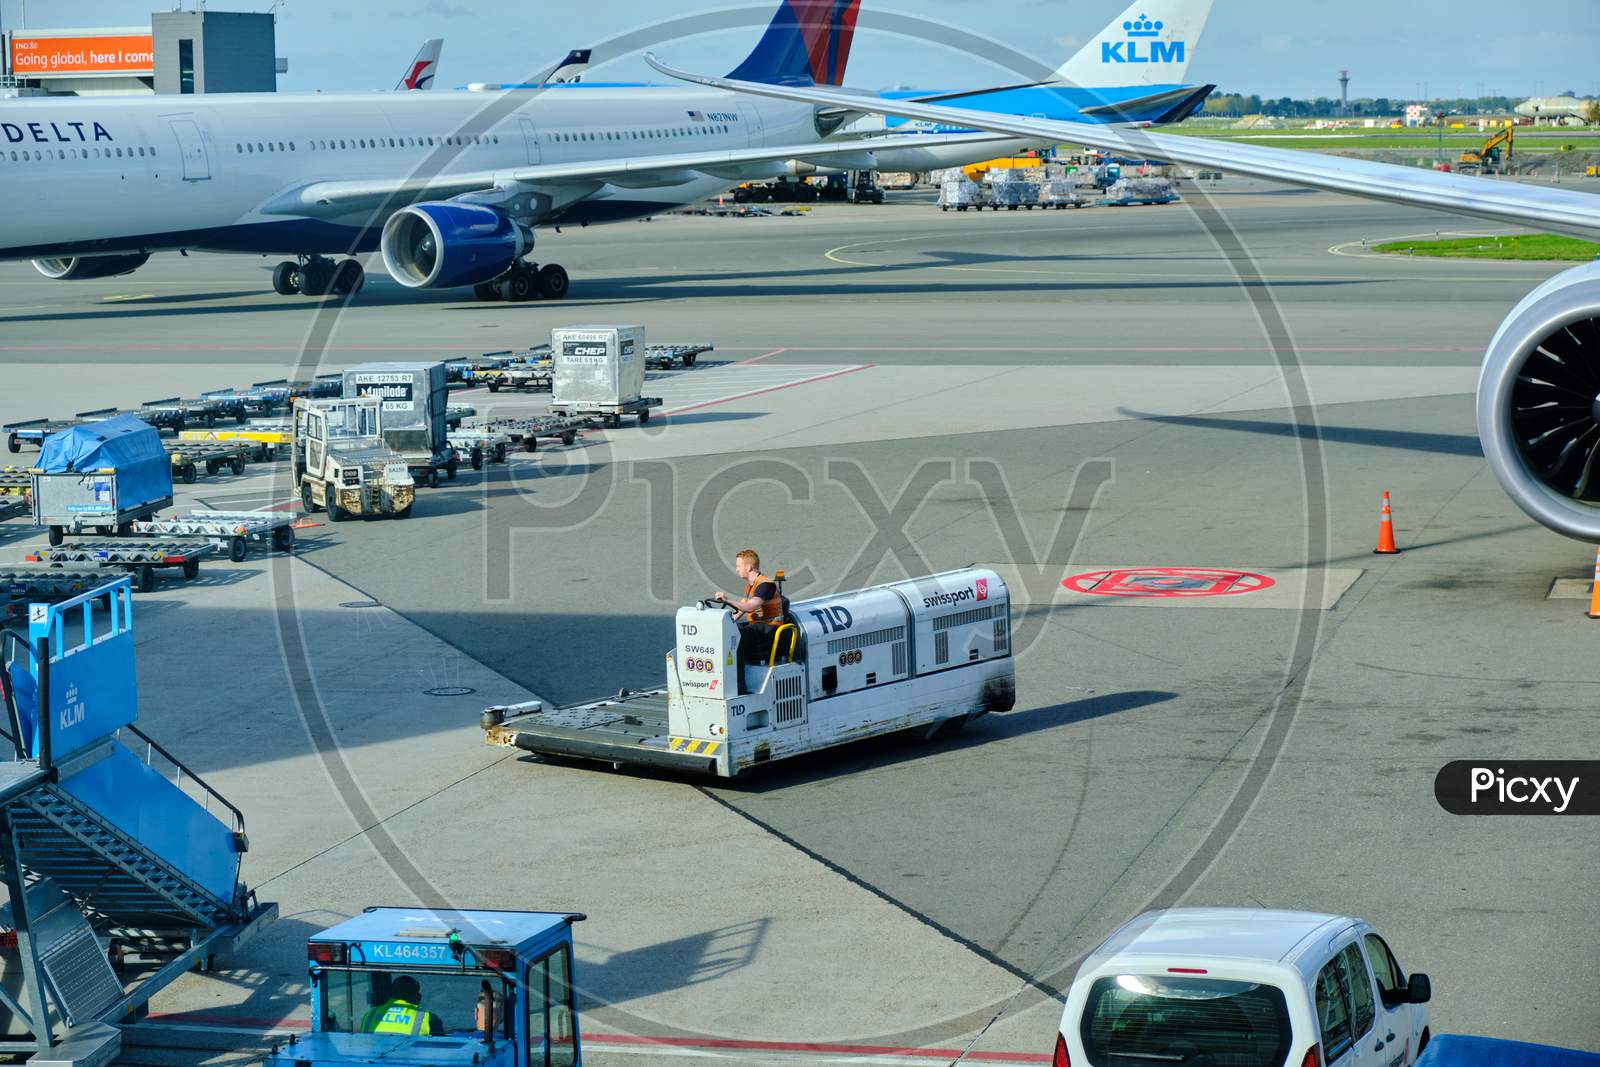 Airport Baggage Tractor At Amsterdam Airport Schiphol In Amsterdam, Netherlands